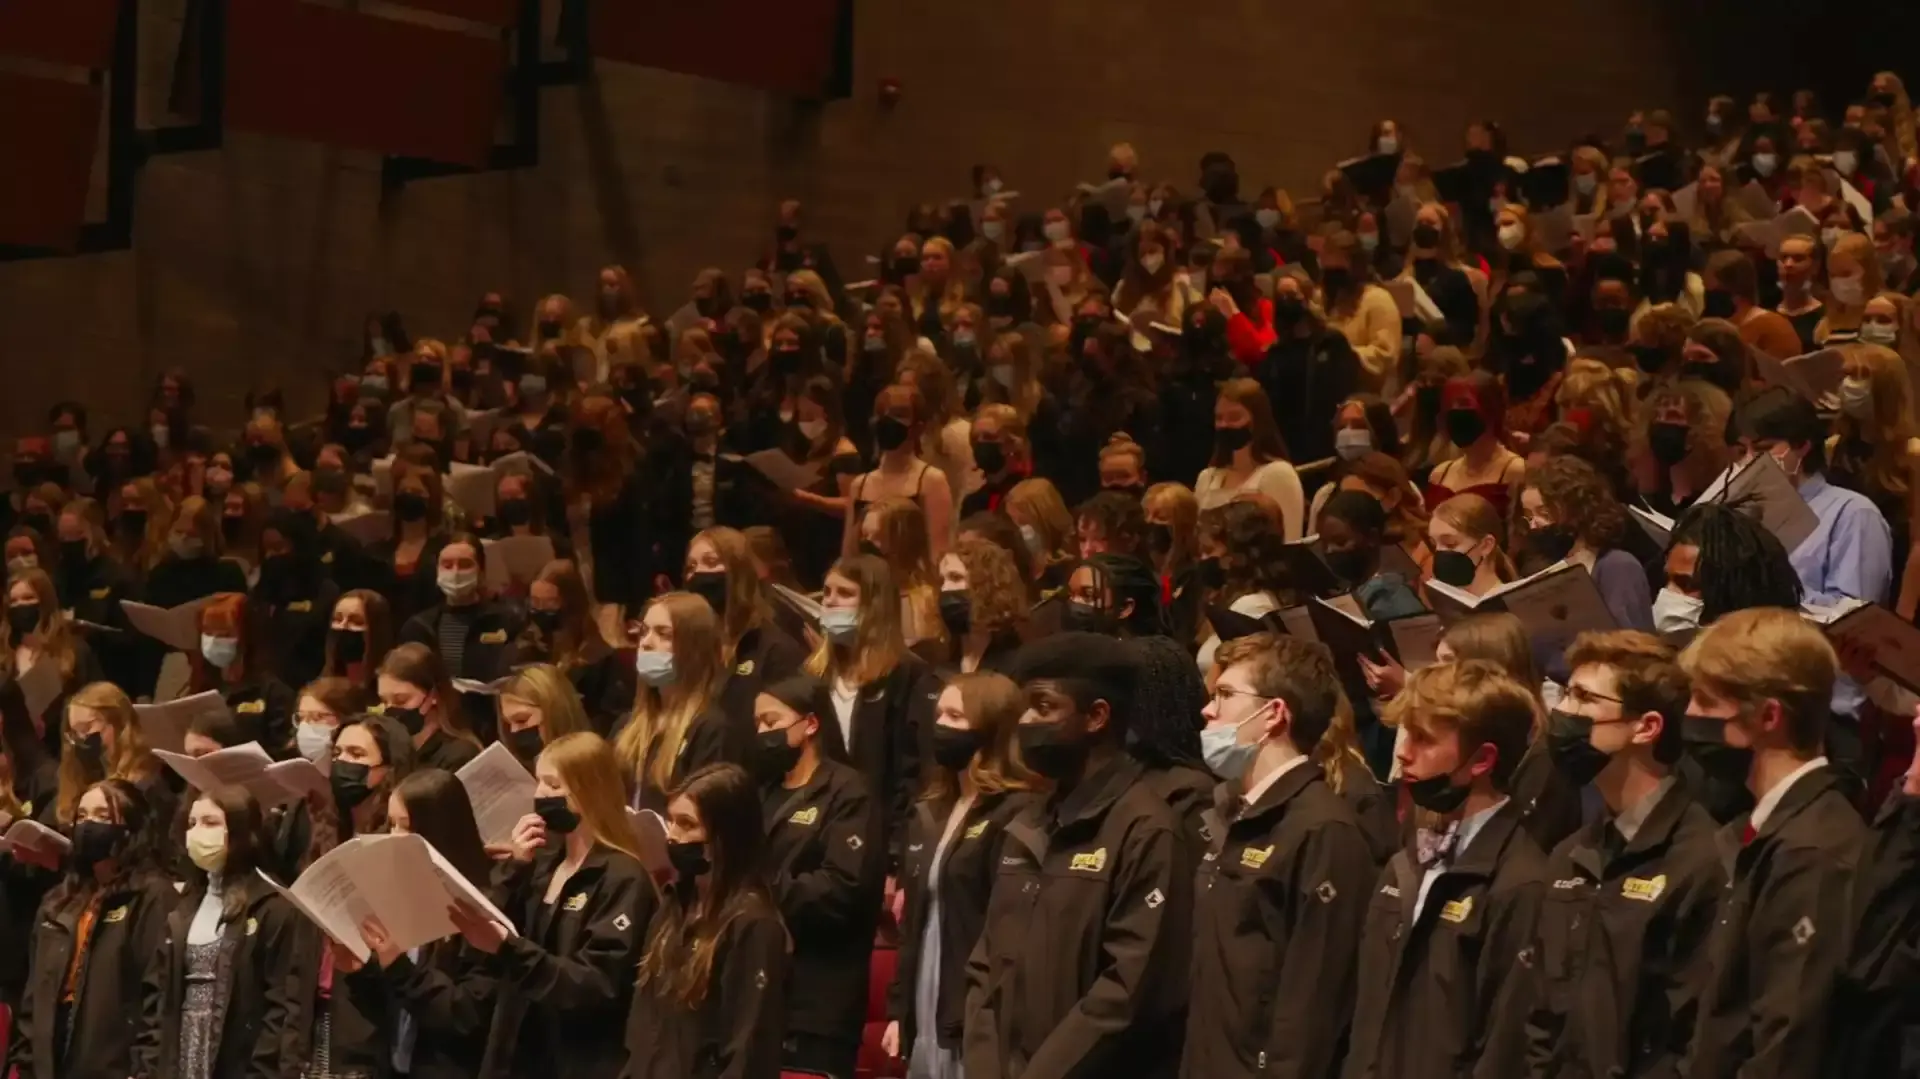 Watch: 750 Minnesota choir students sing patriotic hymn with the Aeolians